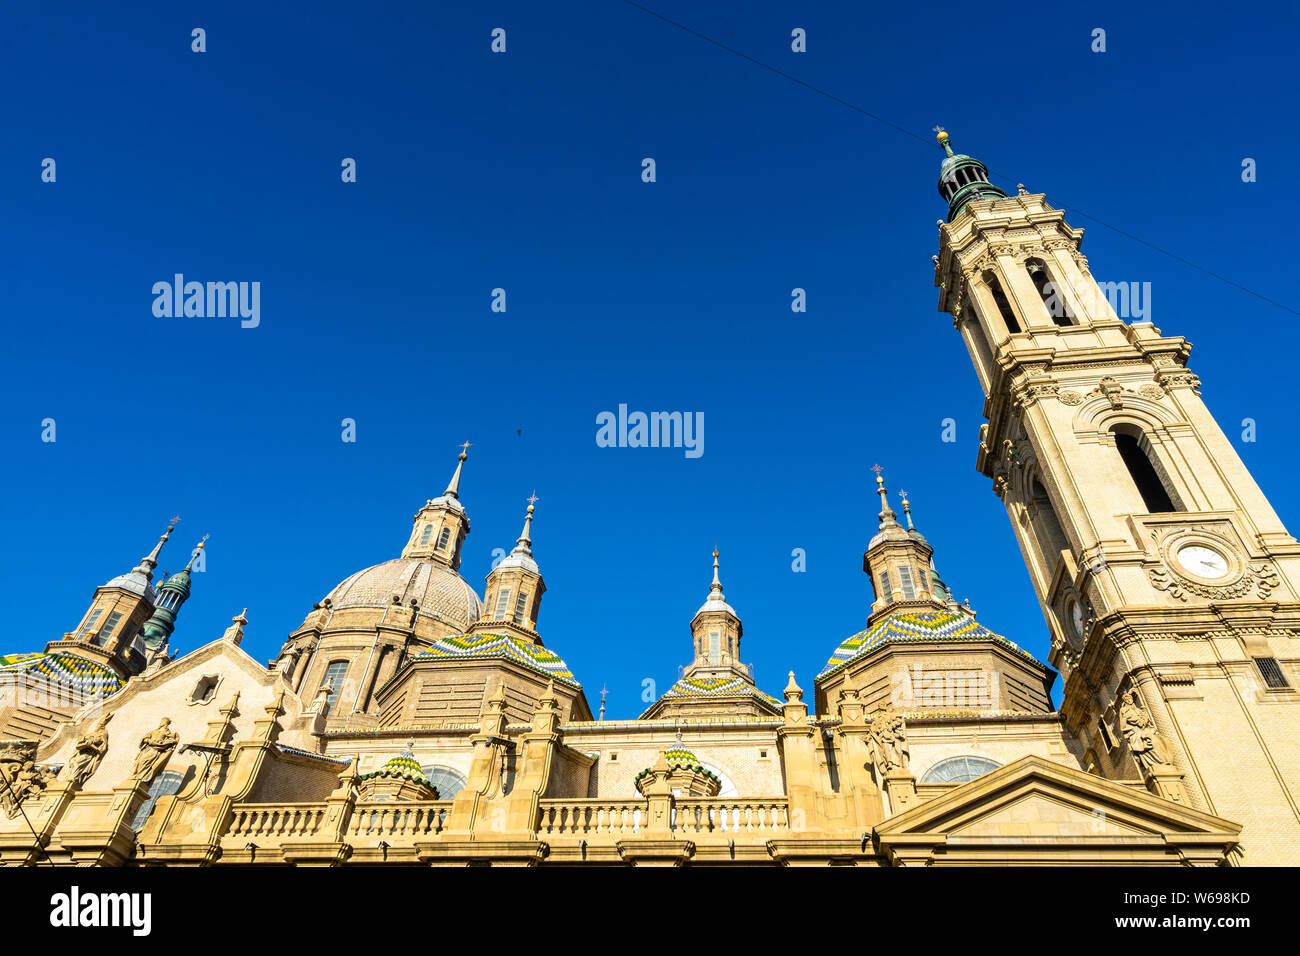 Wide angle view of cupolas and tower bell of the Cathedral of Our Lady of the Pillar, a fine example of Baroque style architecture, Zaragoza, Spain Stock Photo